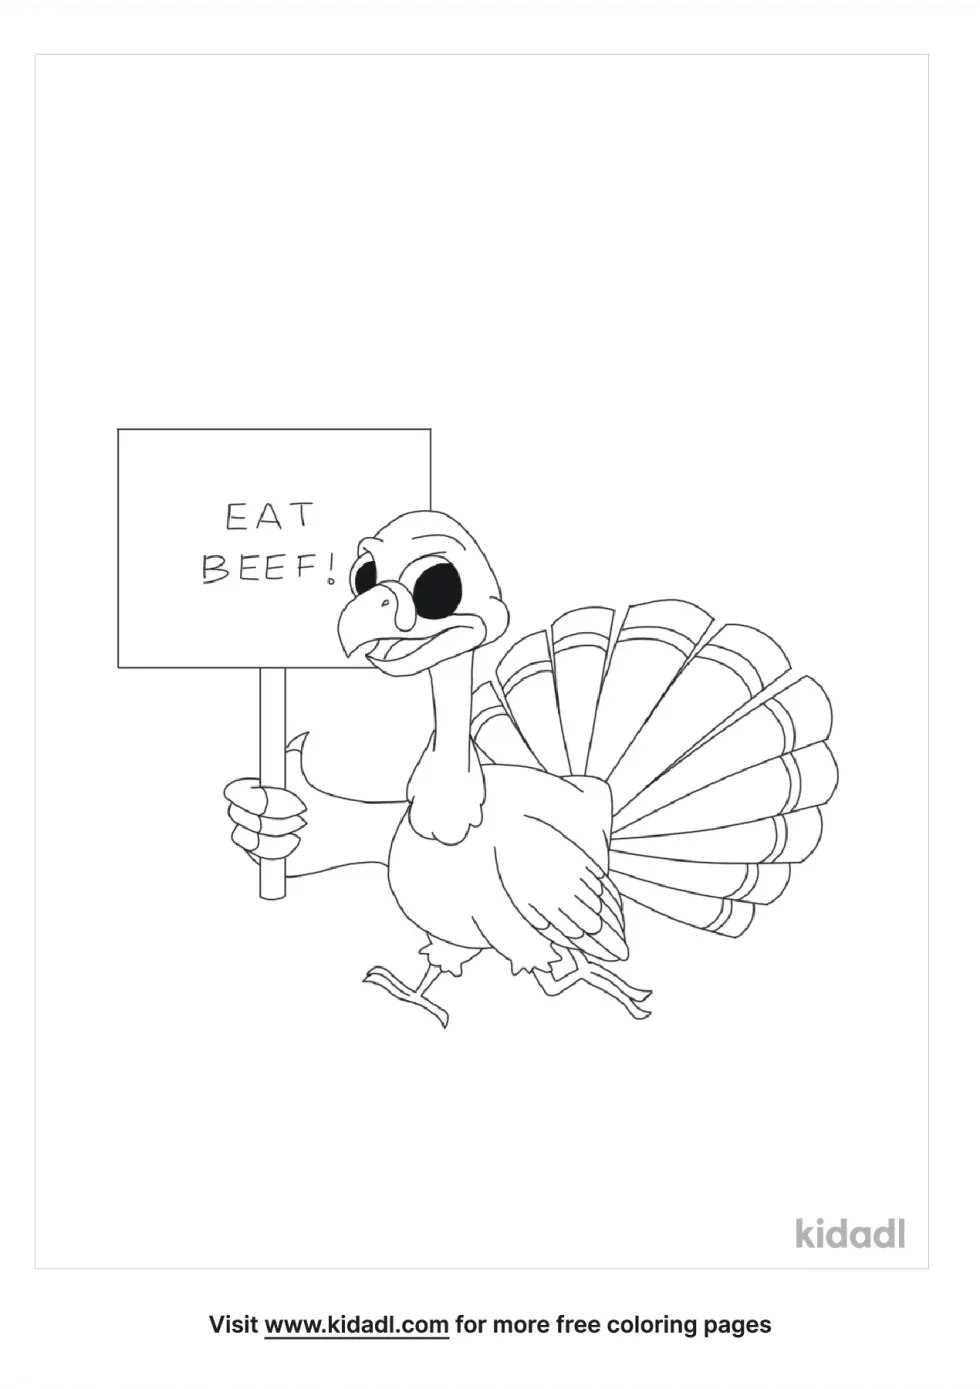 Turkey Eat Beef Coloring Page